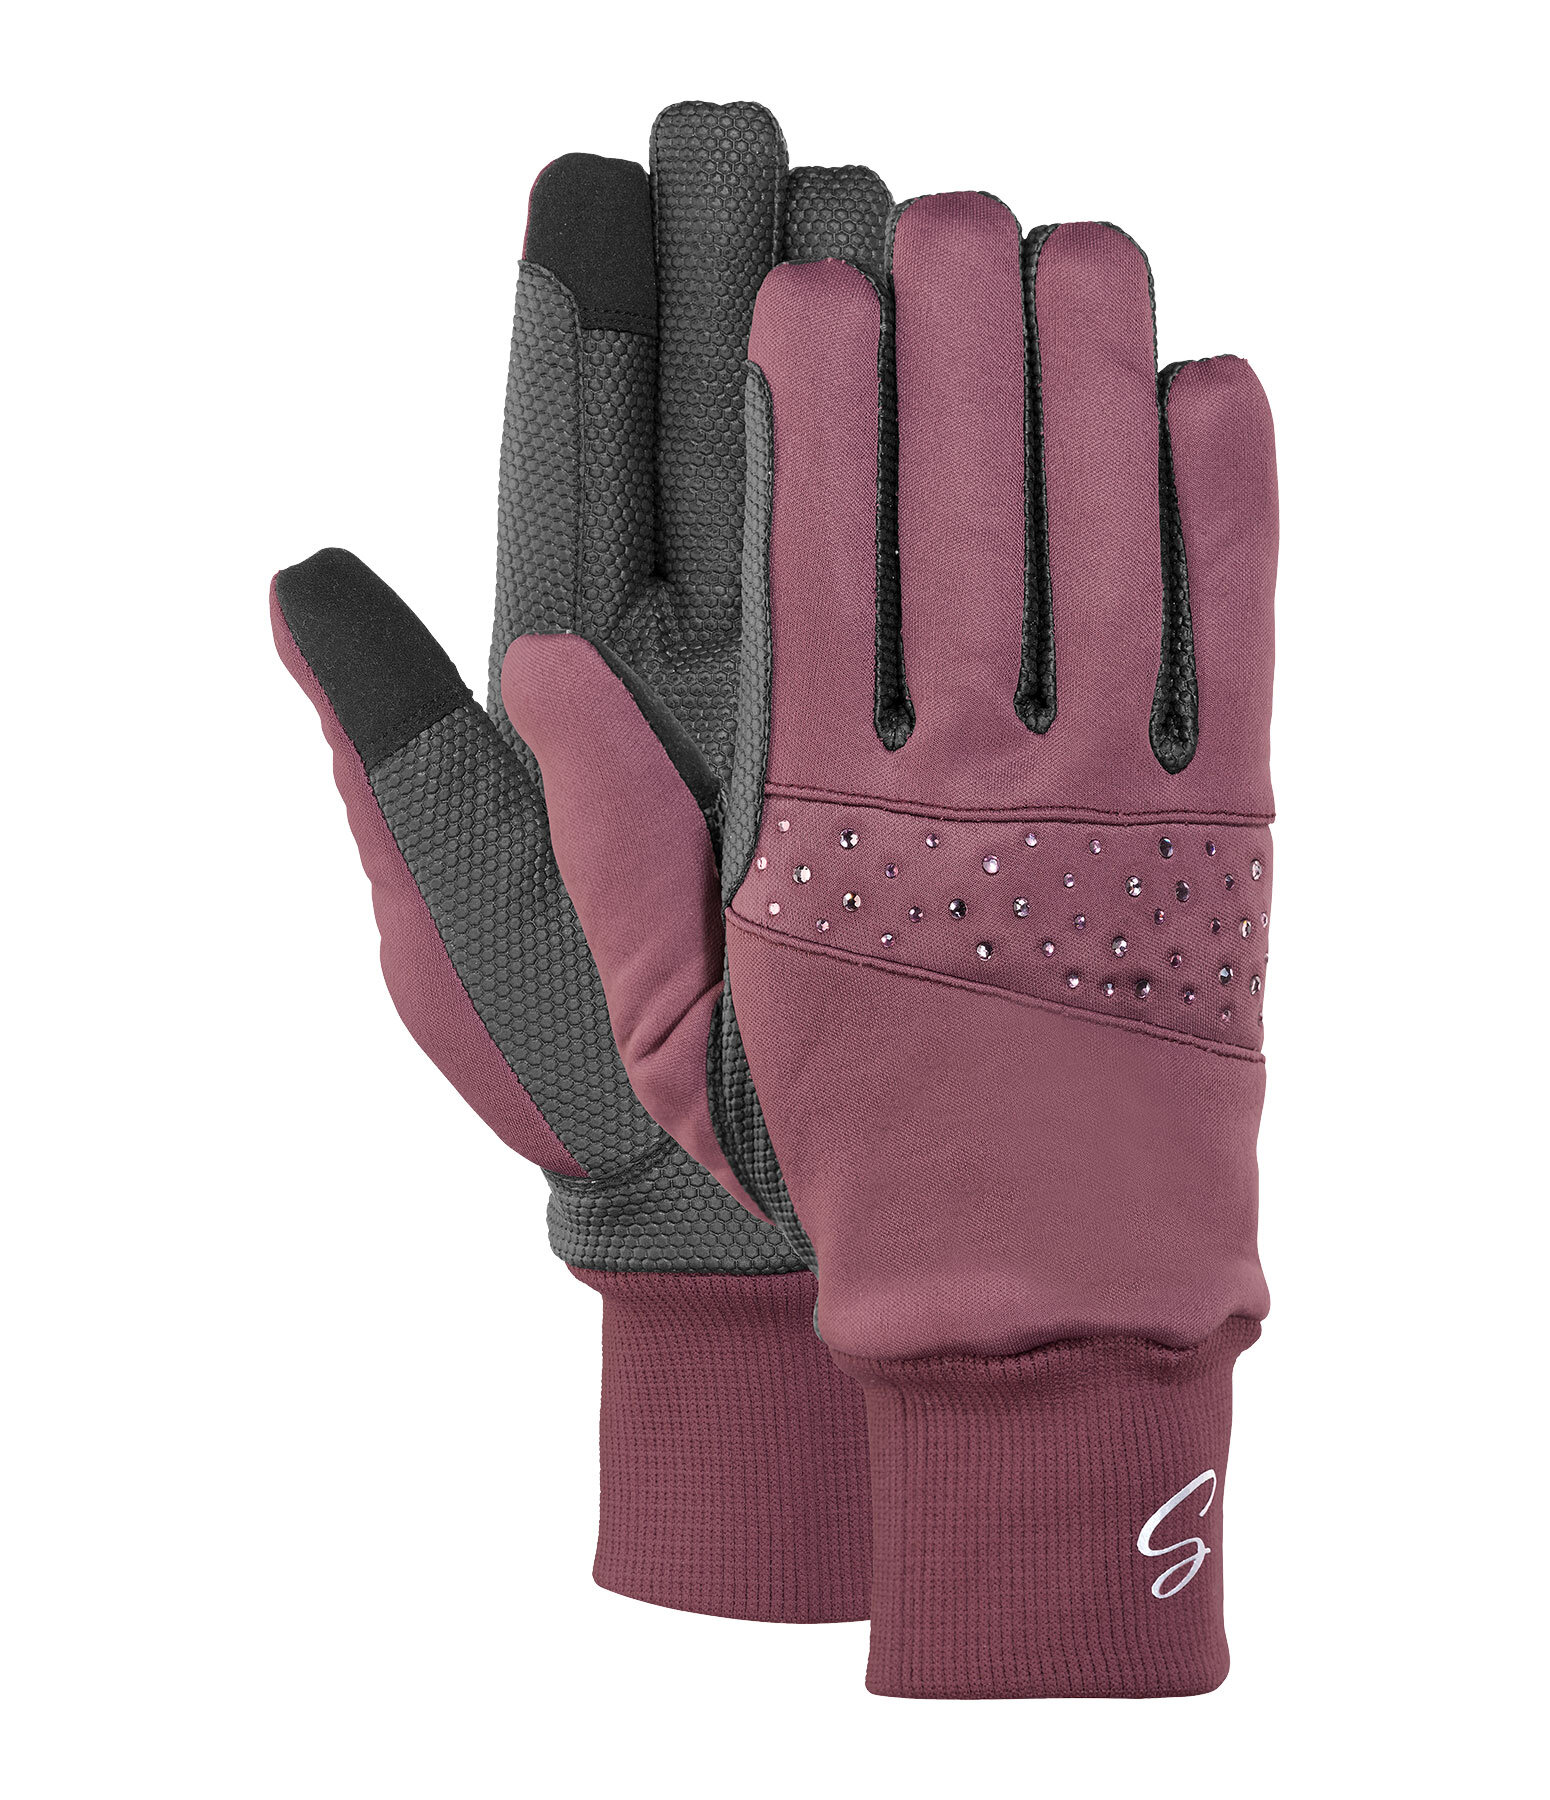 Winter Soft Shell Riding Gloves Sparkle